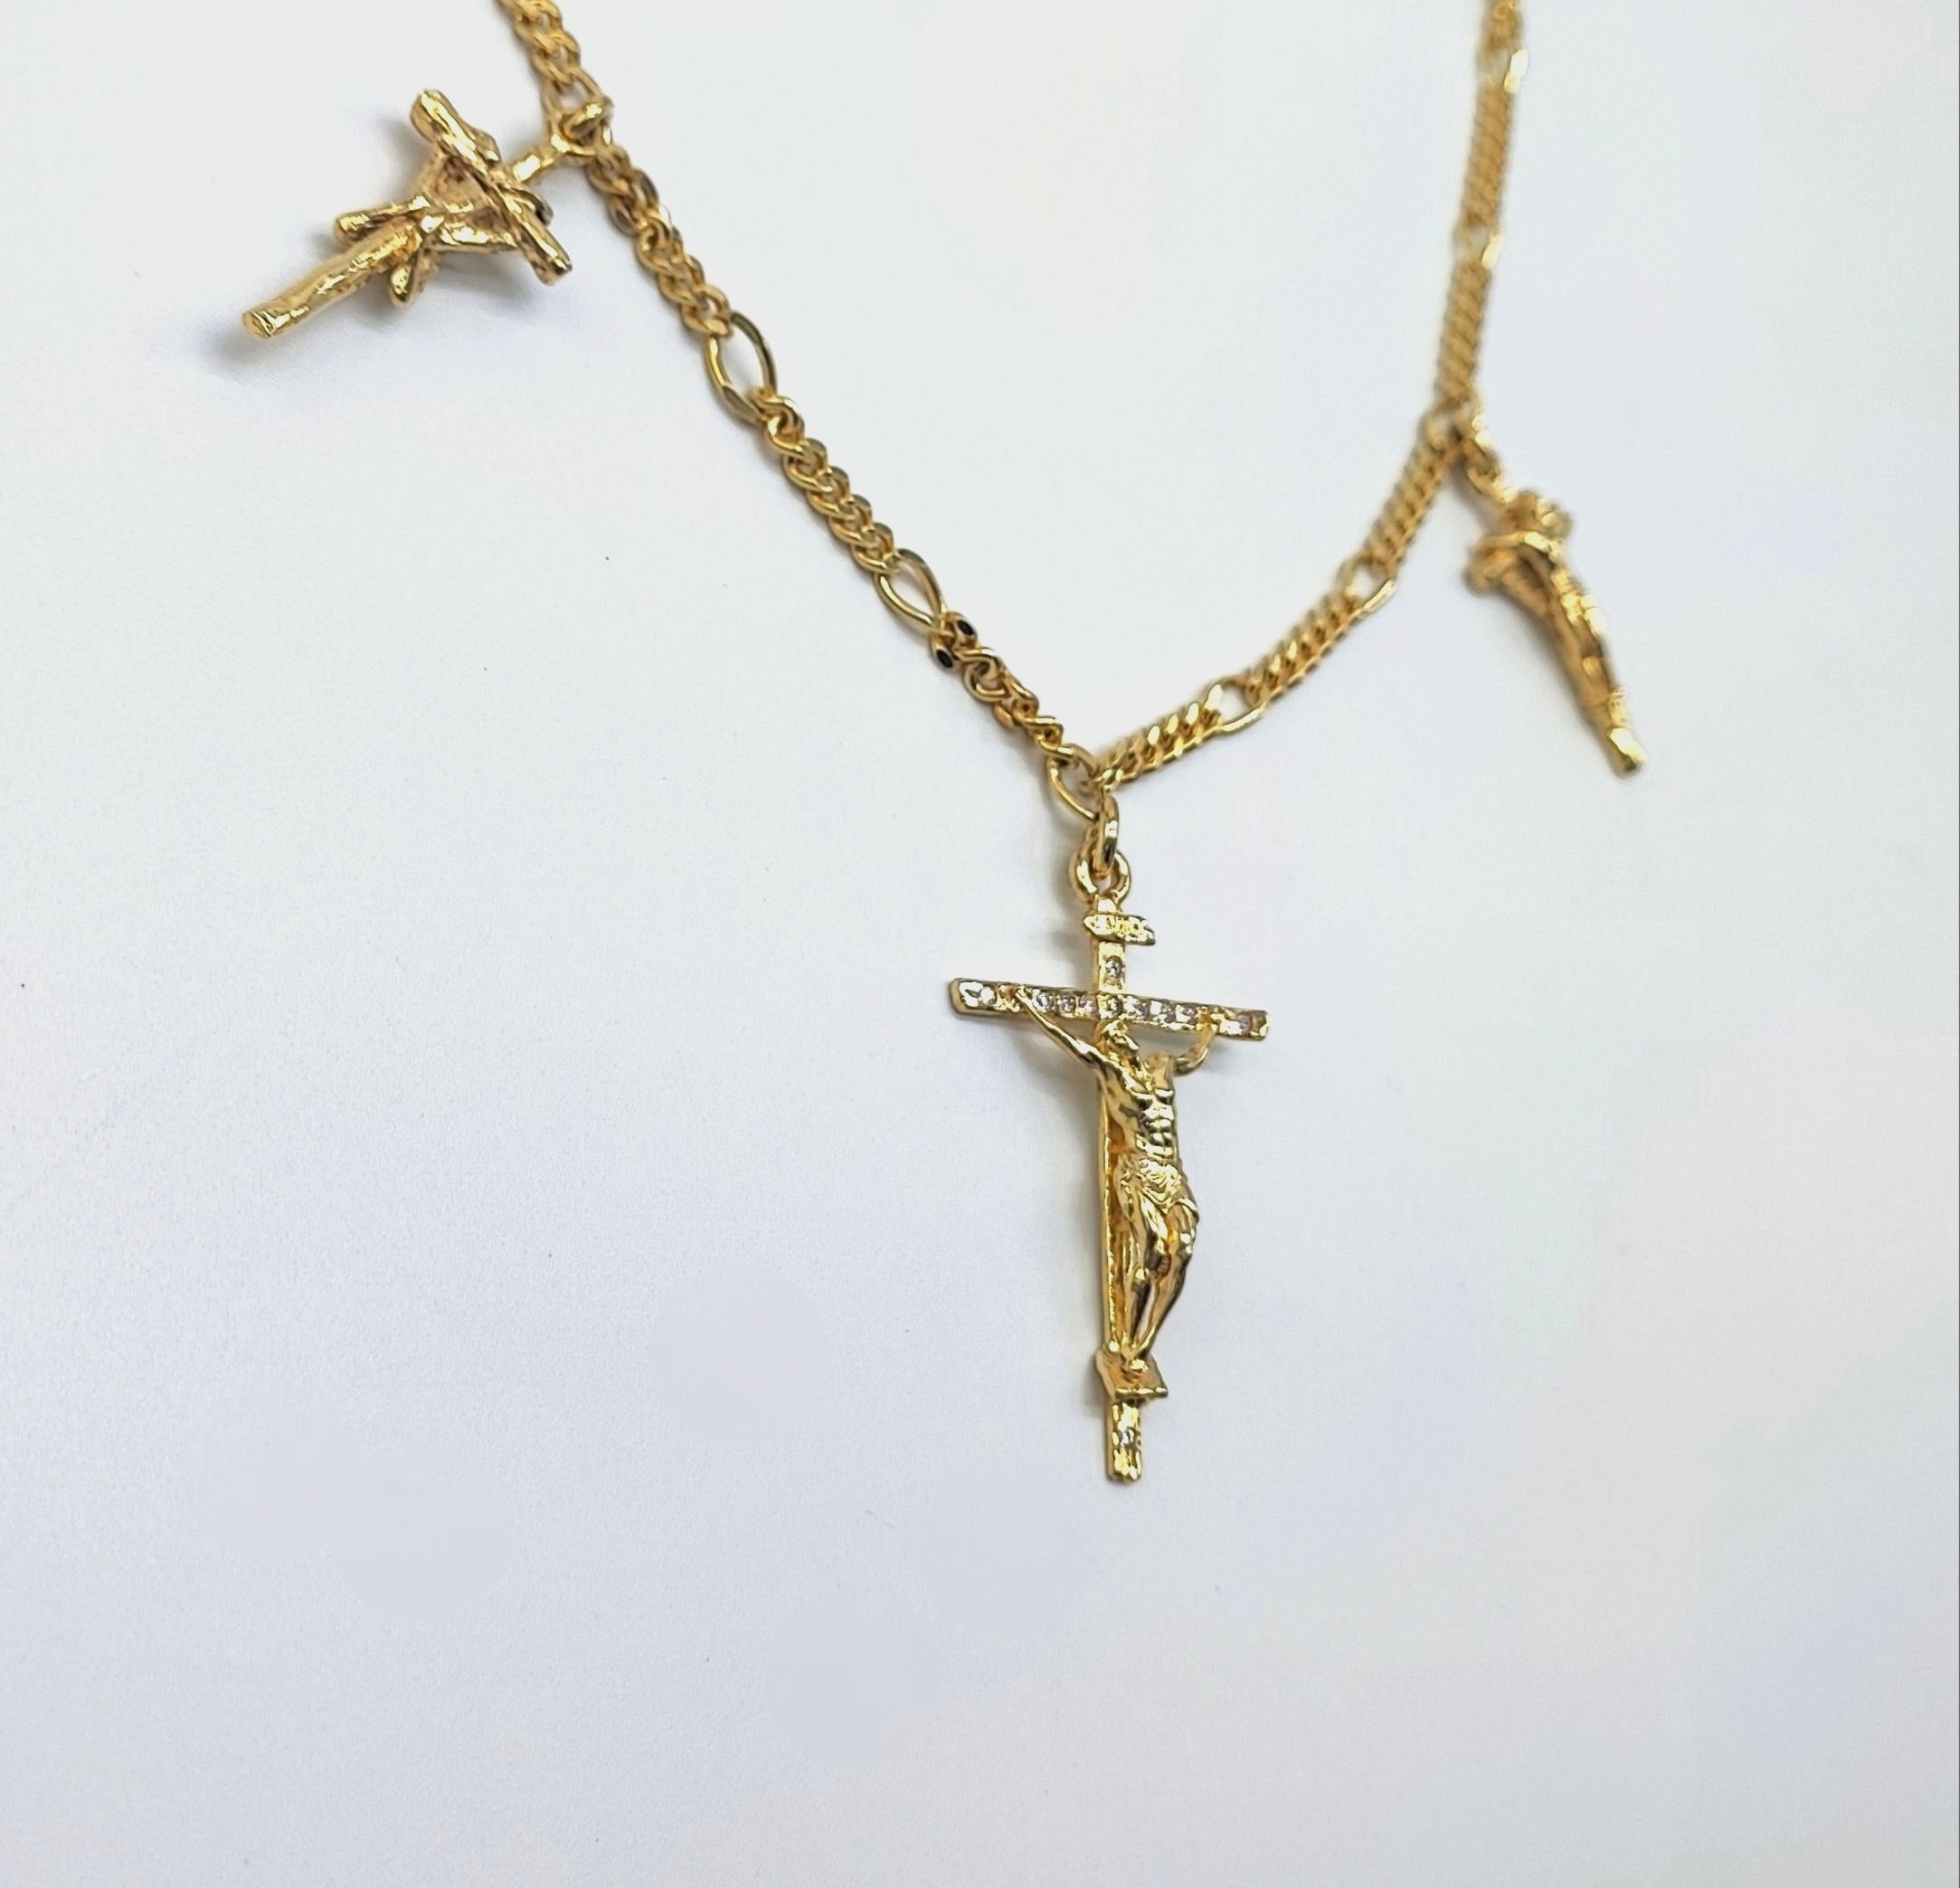 
Large jewel handcrafted by Italian master craftsmen in 14 kt gold and natural diamonds.

The central cross measures 2.3